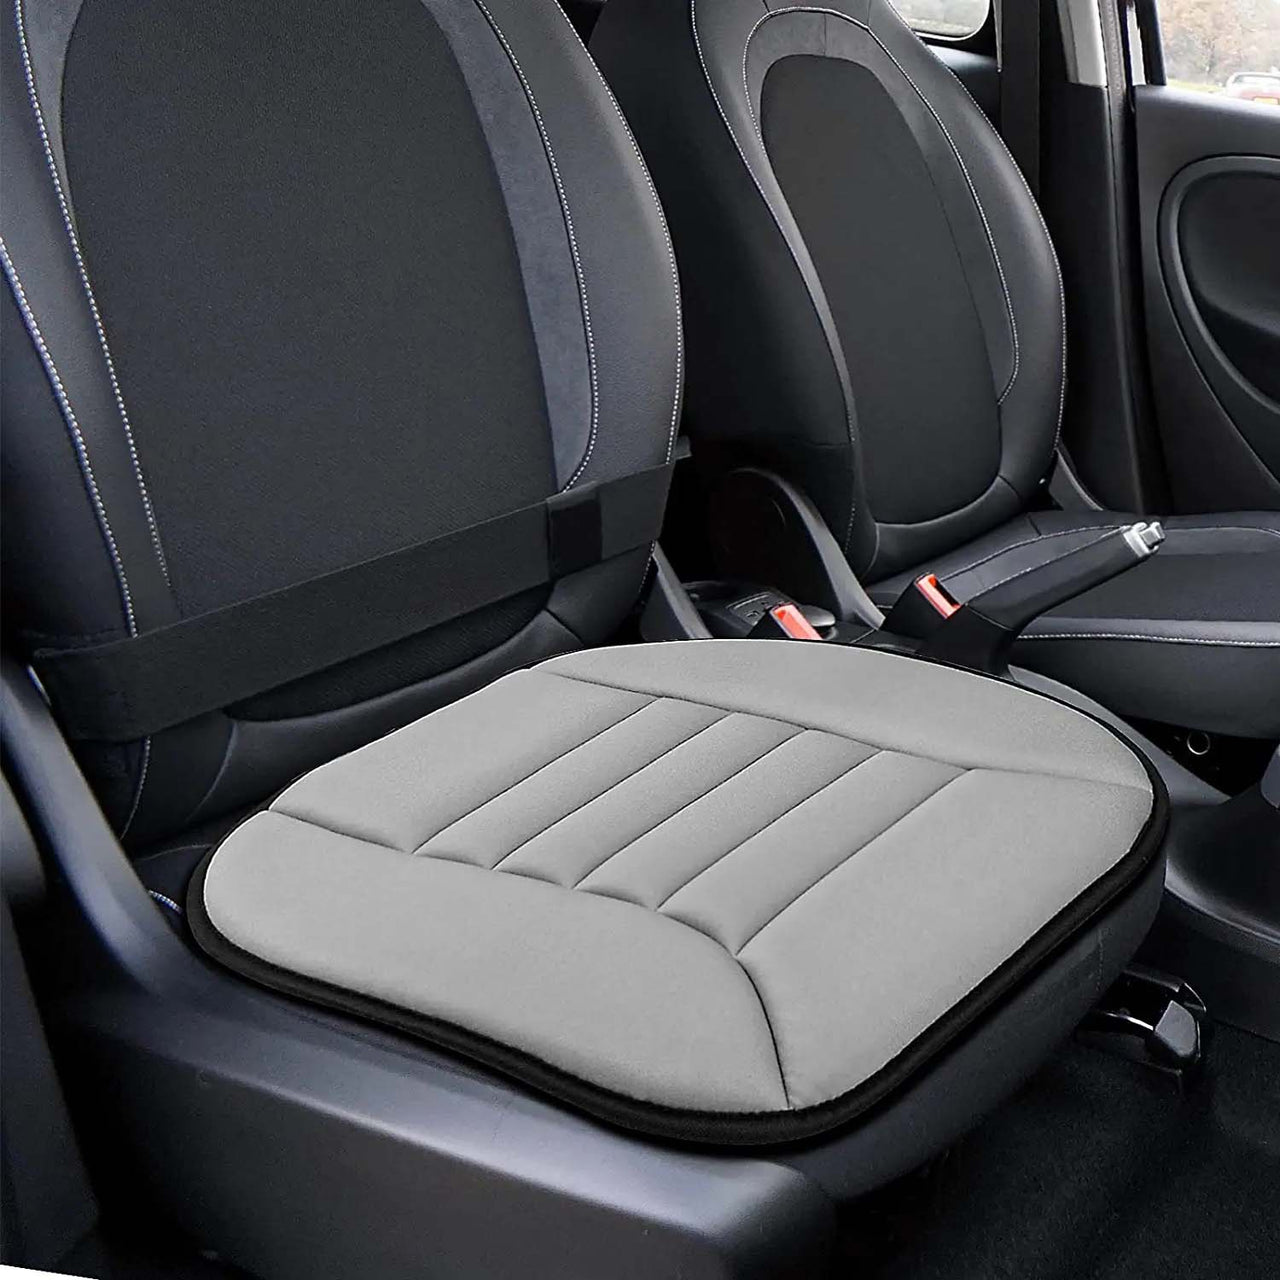 Car Seat Cushion with 1.2inch Comfort Memory Foam, Custom Logo For Your Cars, Seat Cushion for Car and Office Chair VE19989